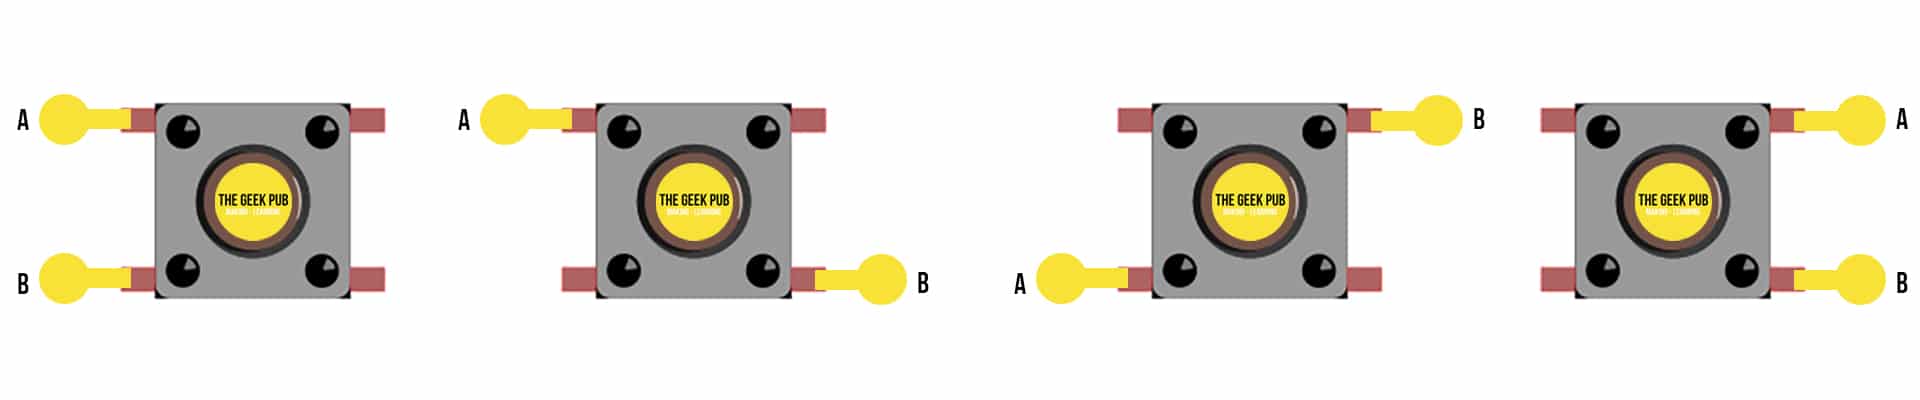 Possible ways to wire an Arduino button